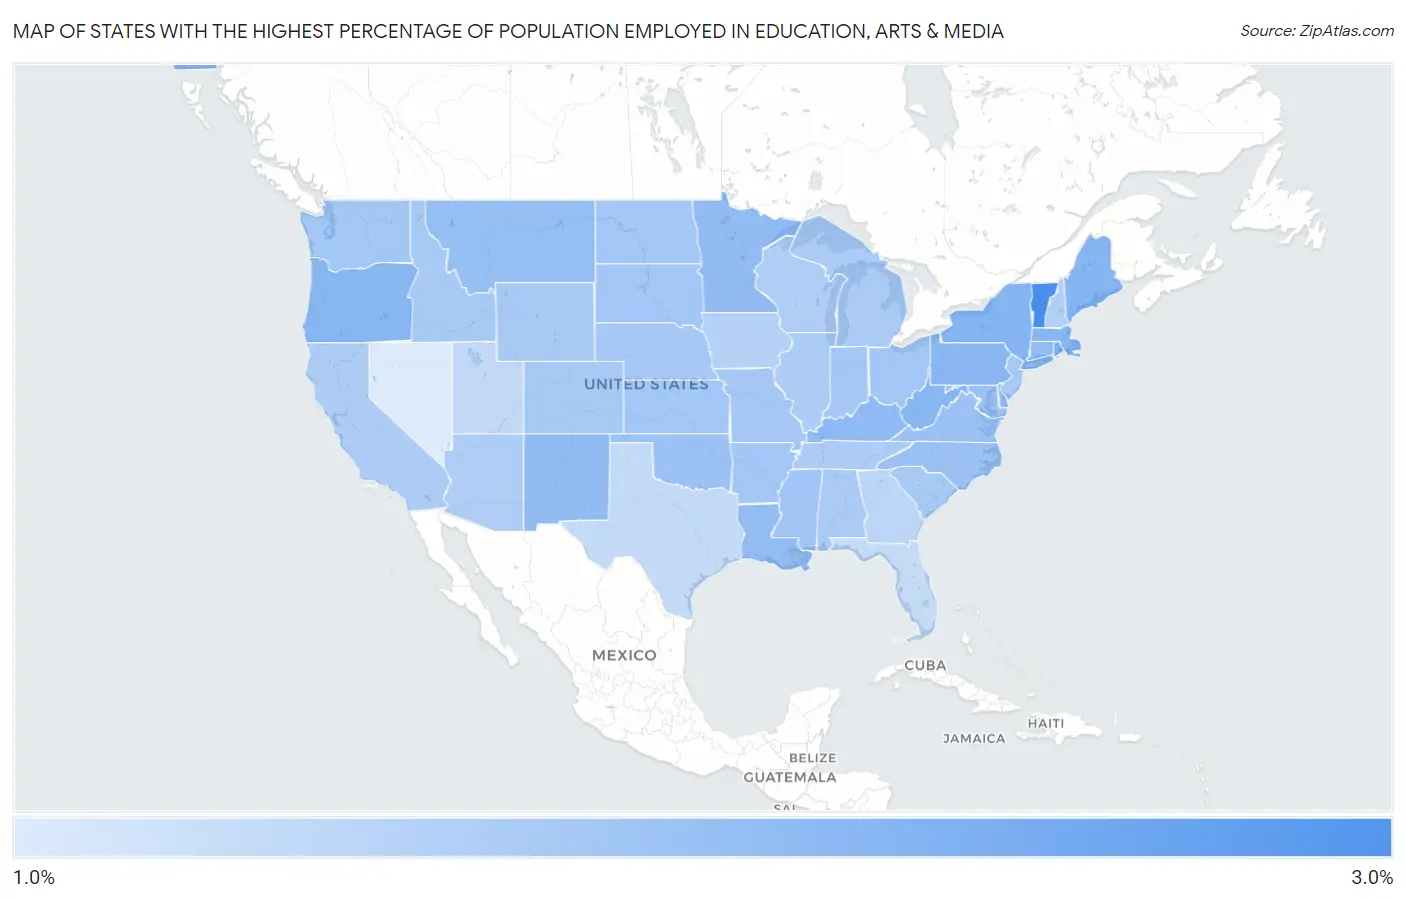 States with the Highest Percentage of Population Employed in Education, Arts & Media in the United States Map